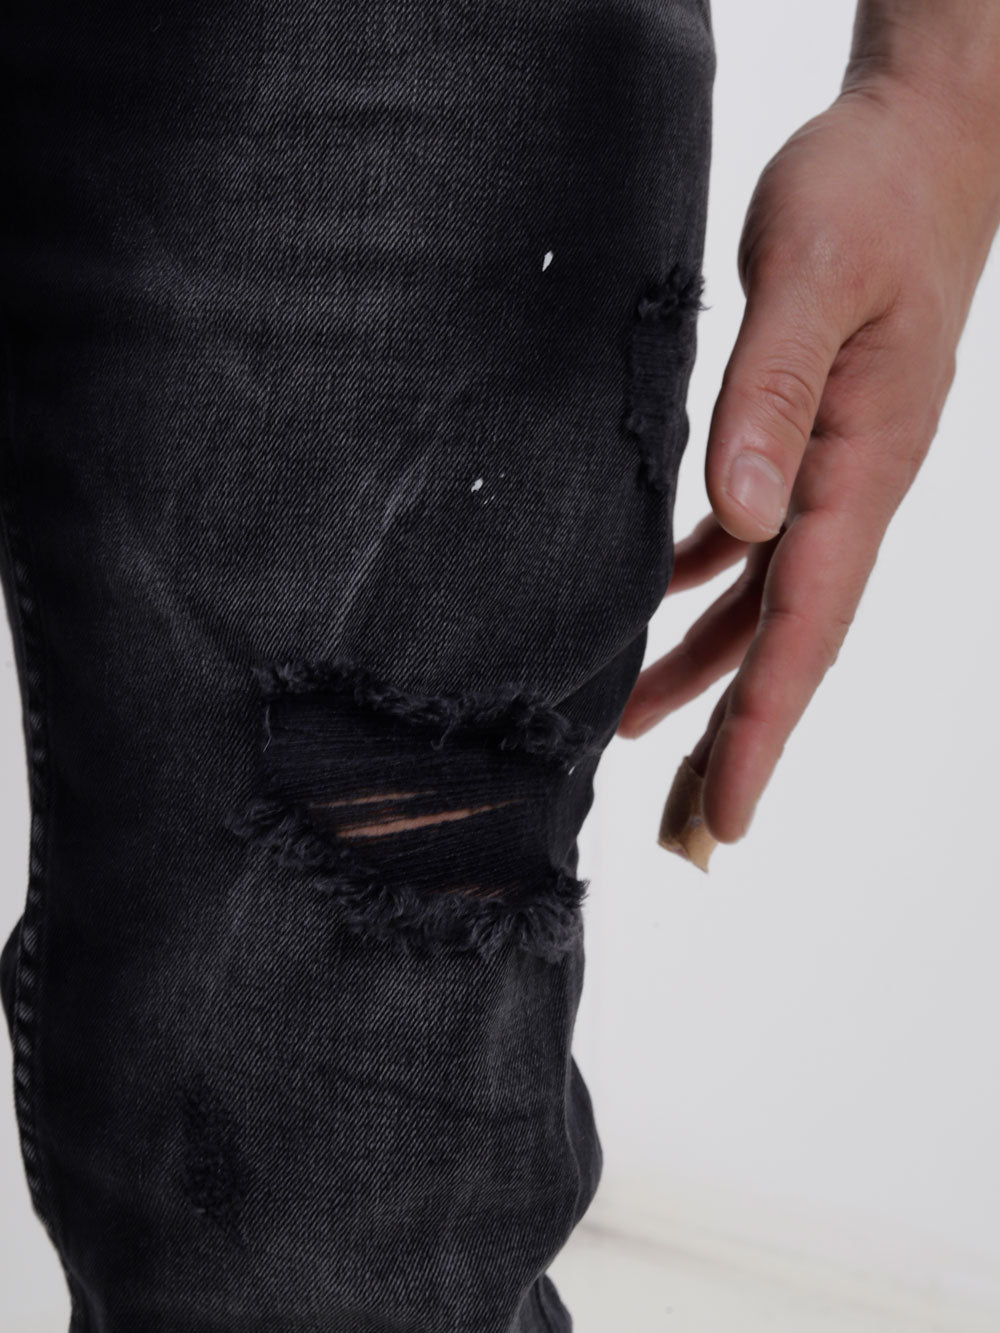 A man is holding a pair of MODERO black jeans with holes in them.